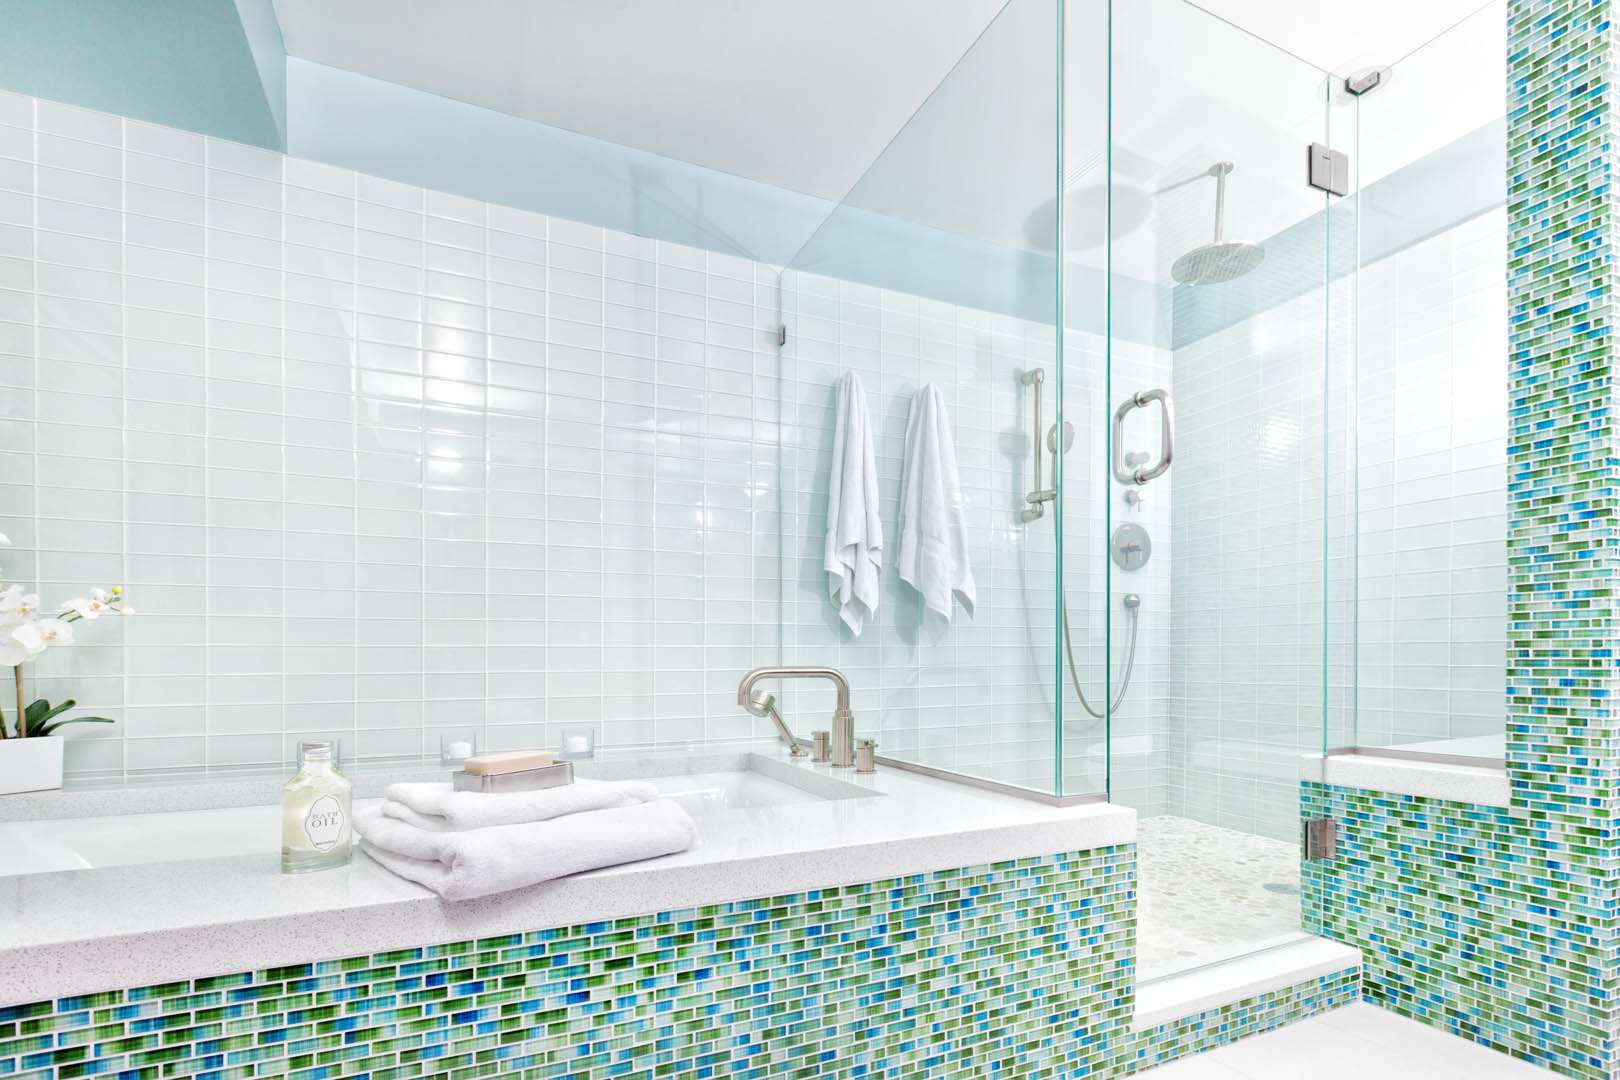 A bathroom with a glass shower and tiled walls.